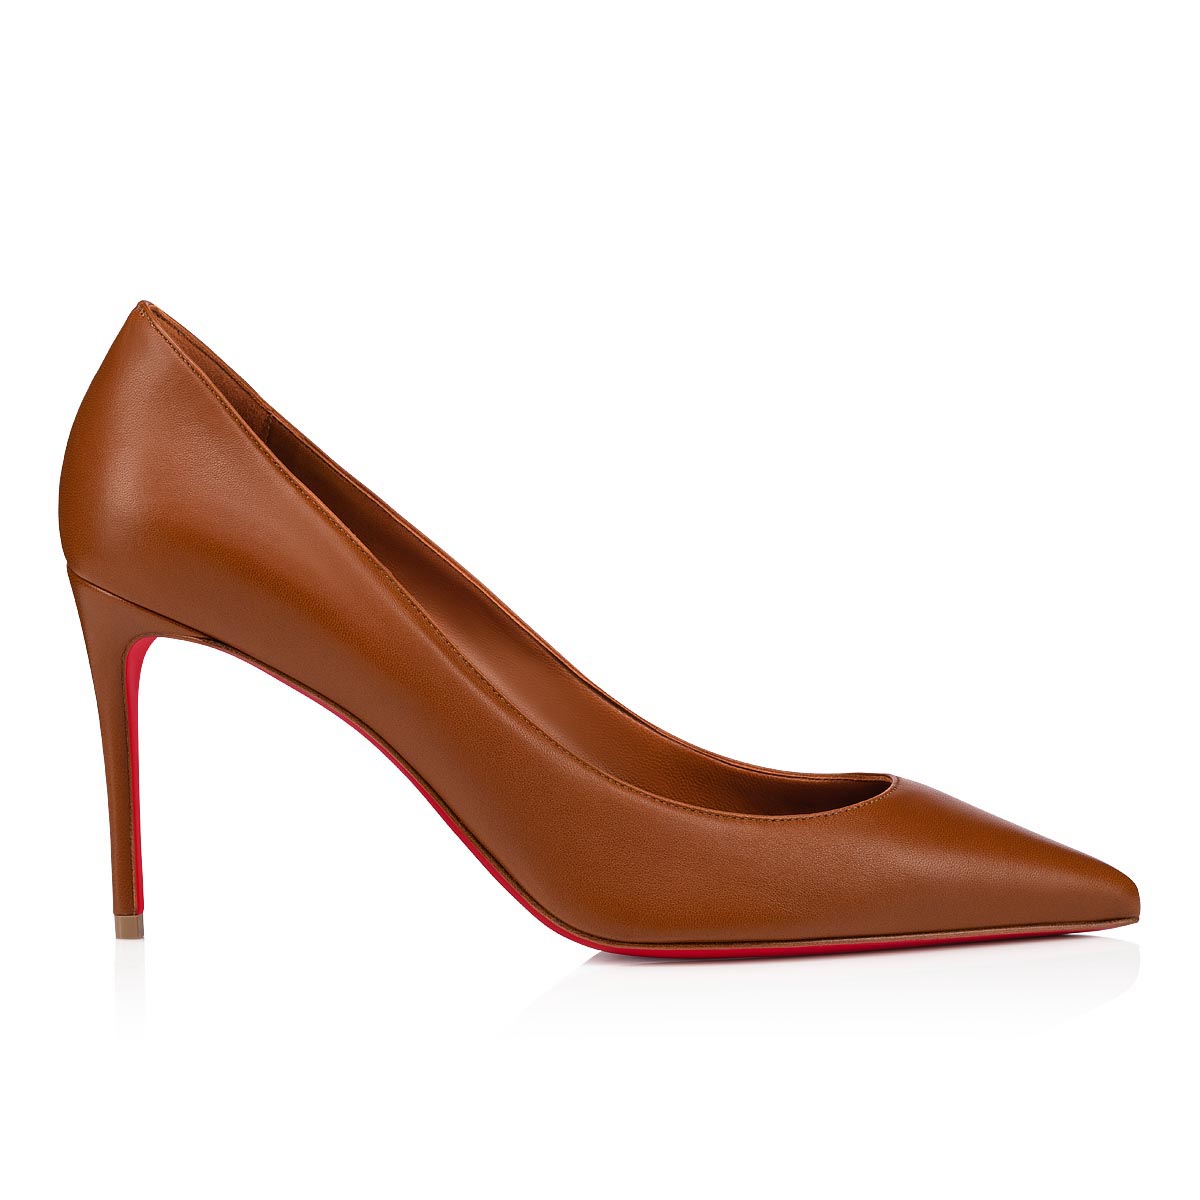 authentic red bottoms for cheap in nude color by CarmenHeel.com